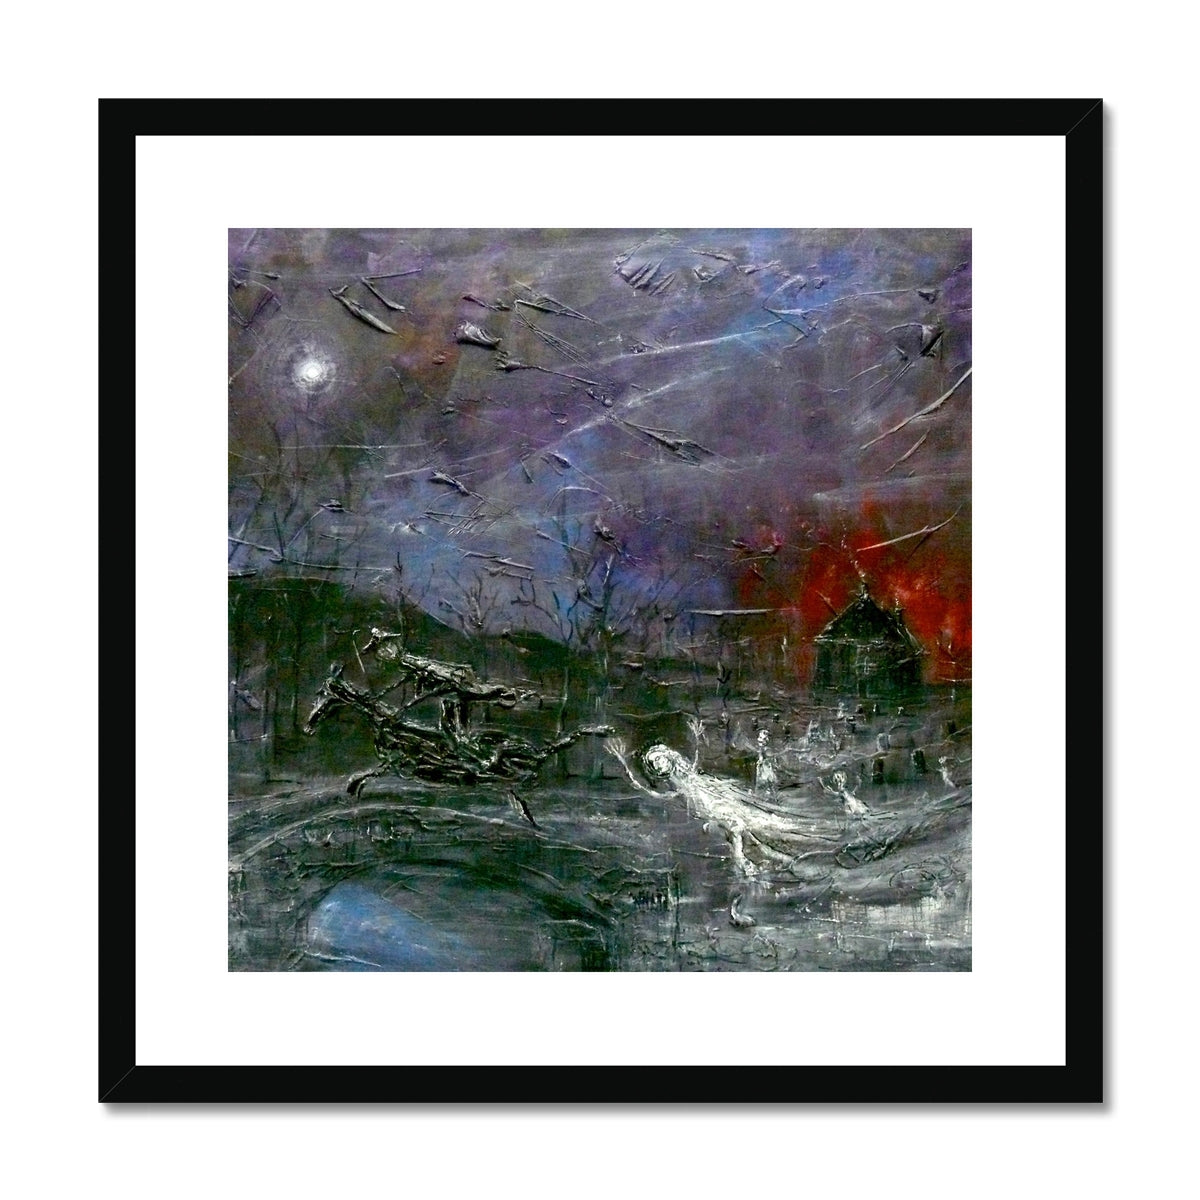 Tam O Shanter Painting | Framed & Mounted Prints From Scotland-Framed & Mounted Prints-Abstract & Impressionistic Art Gallery-20"x20"-Black Frame-Paintings, Prints, Homeware, Art Gifts From Scotland By Scottish Artist Kevin Hunter